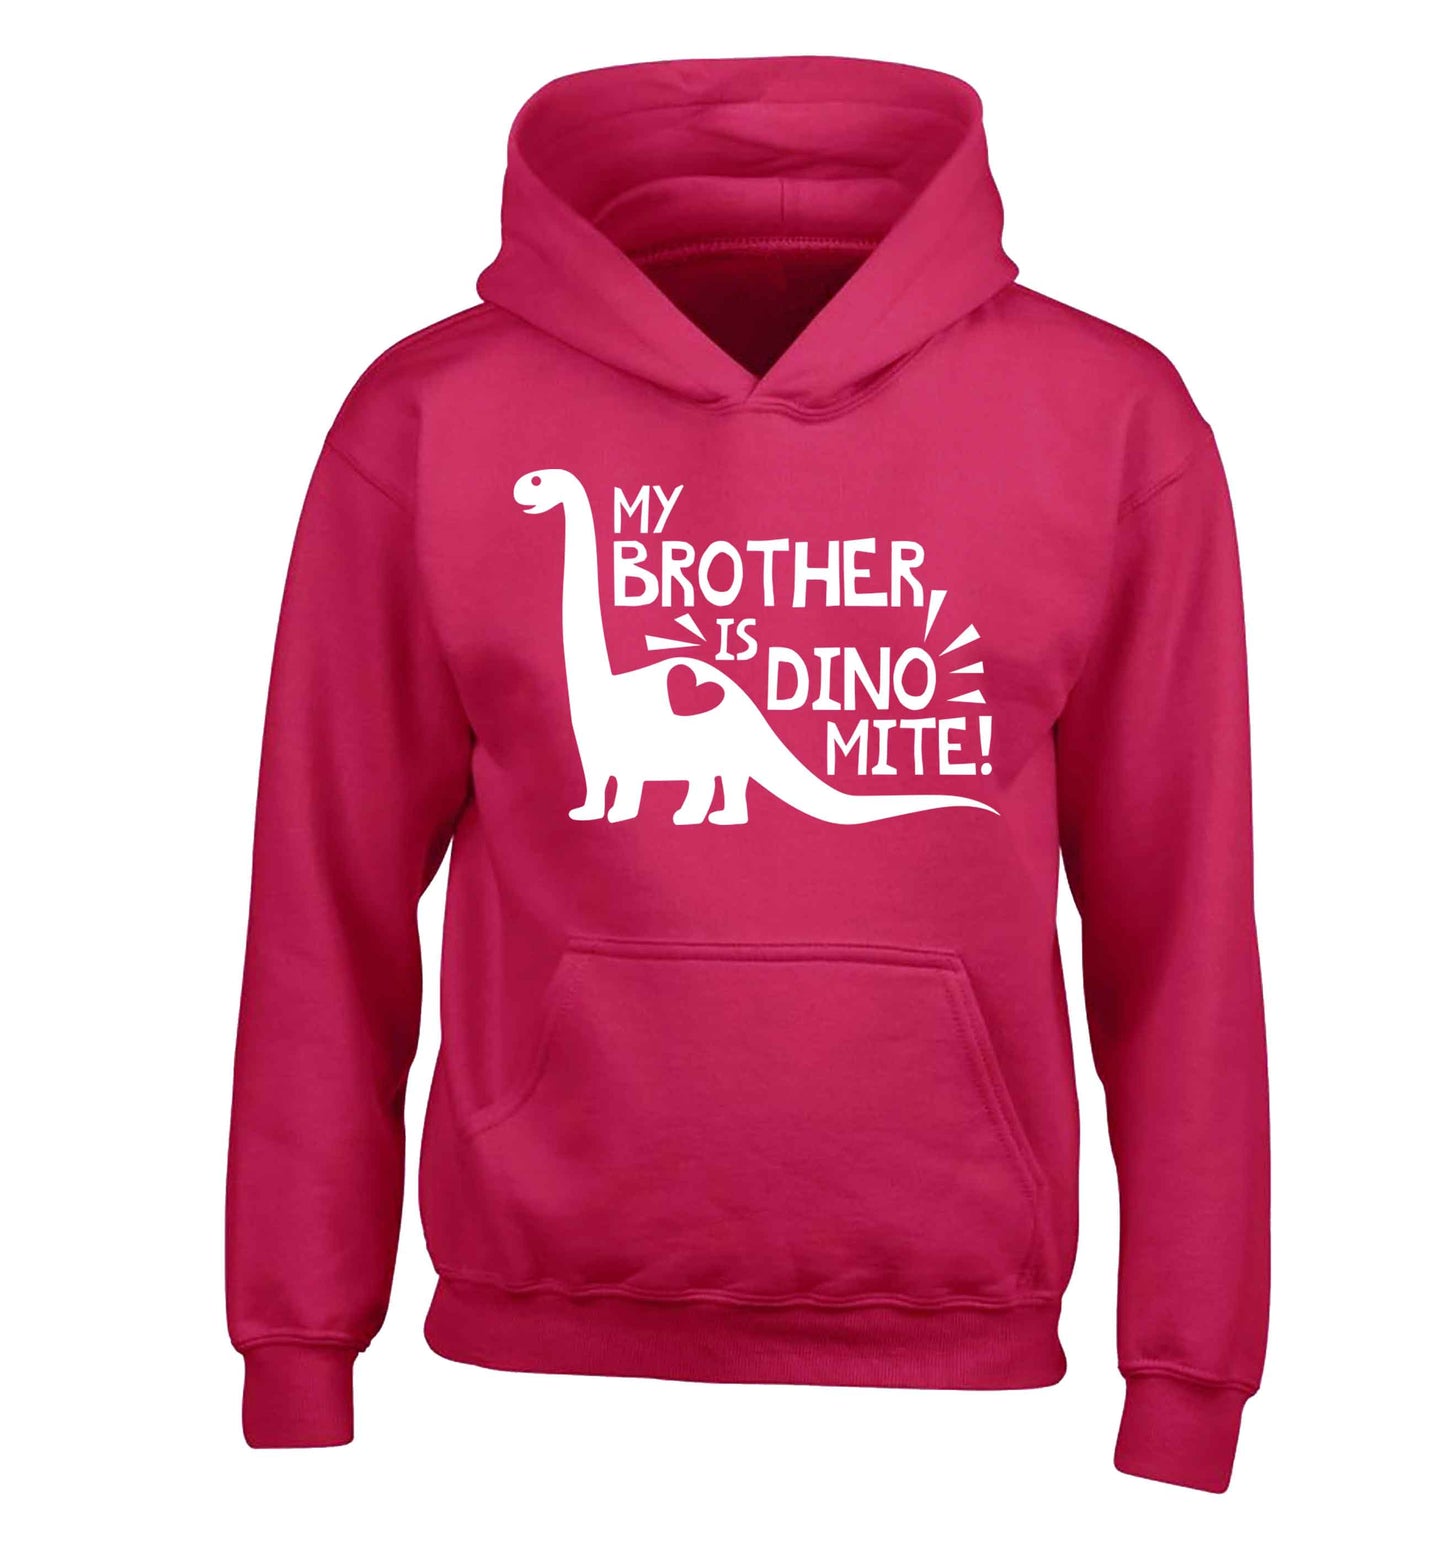 My brother is dinomite! children's pink hoodie 12-13 Years